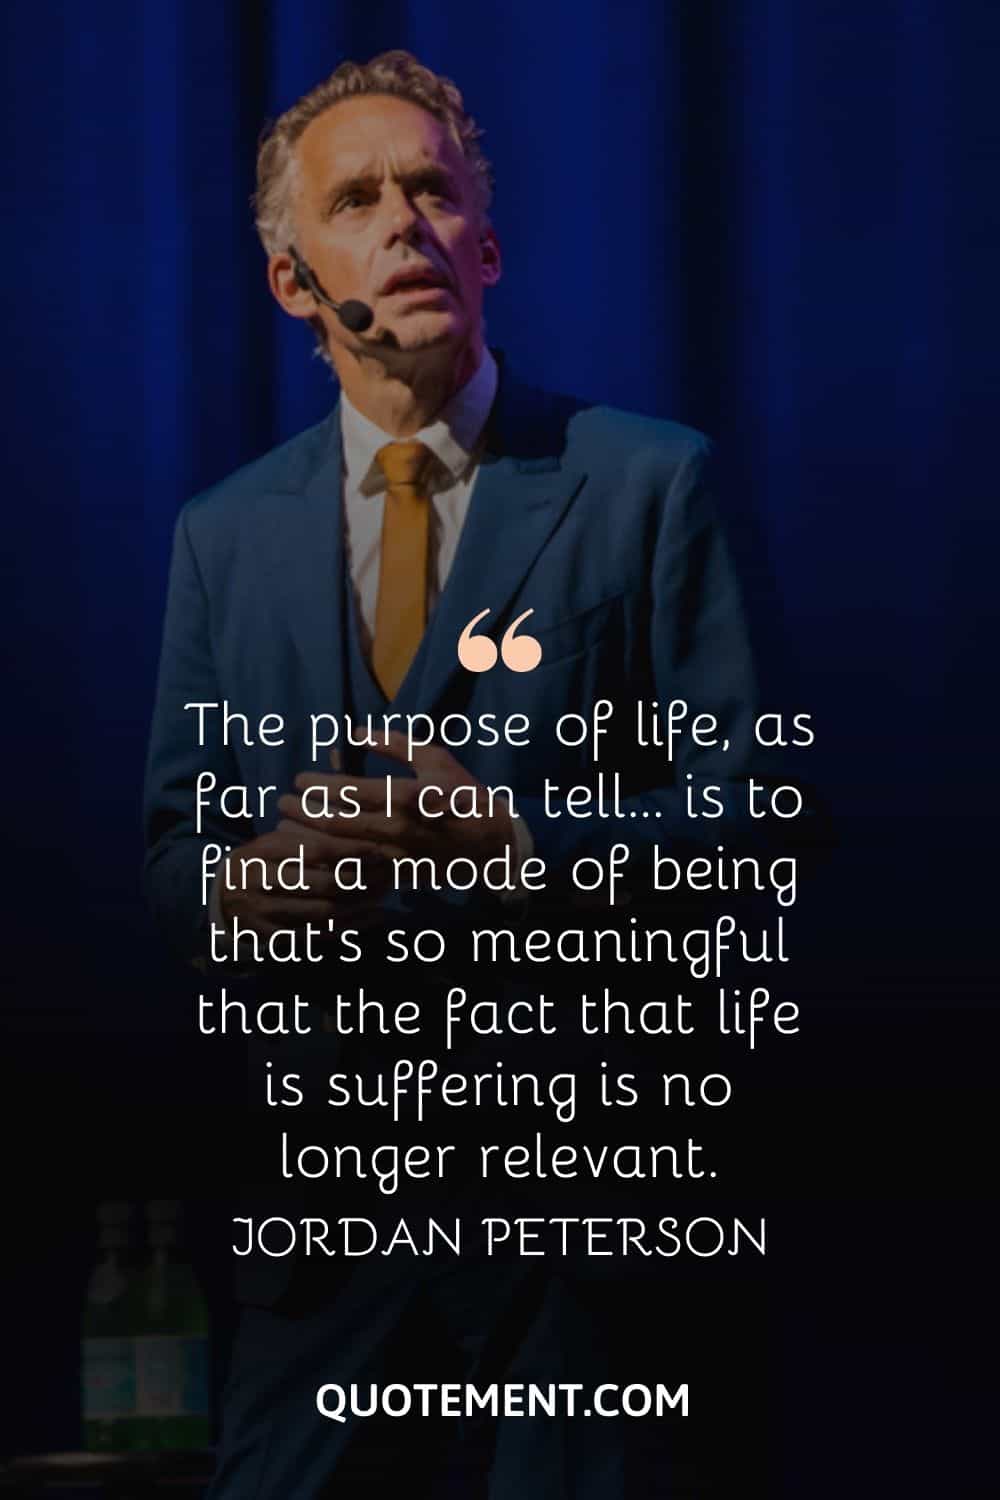 “The purpose of life, as far as I can tell… is to find a mode of being that’s so meaningful that the fact that life is suffering is no longer relevant.” — Jordan Peterson